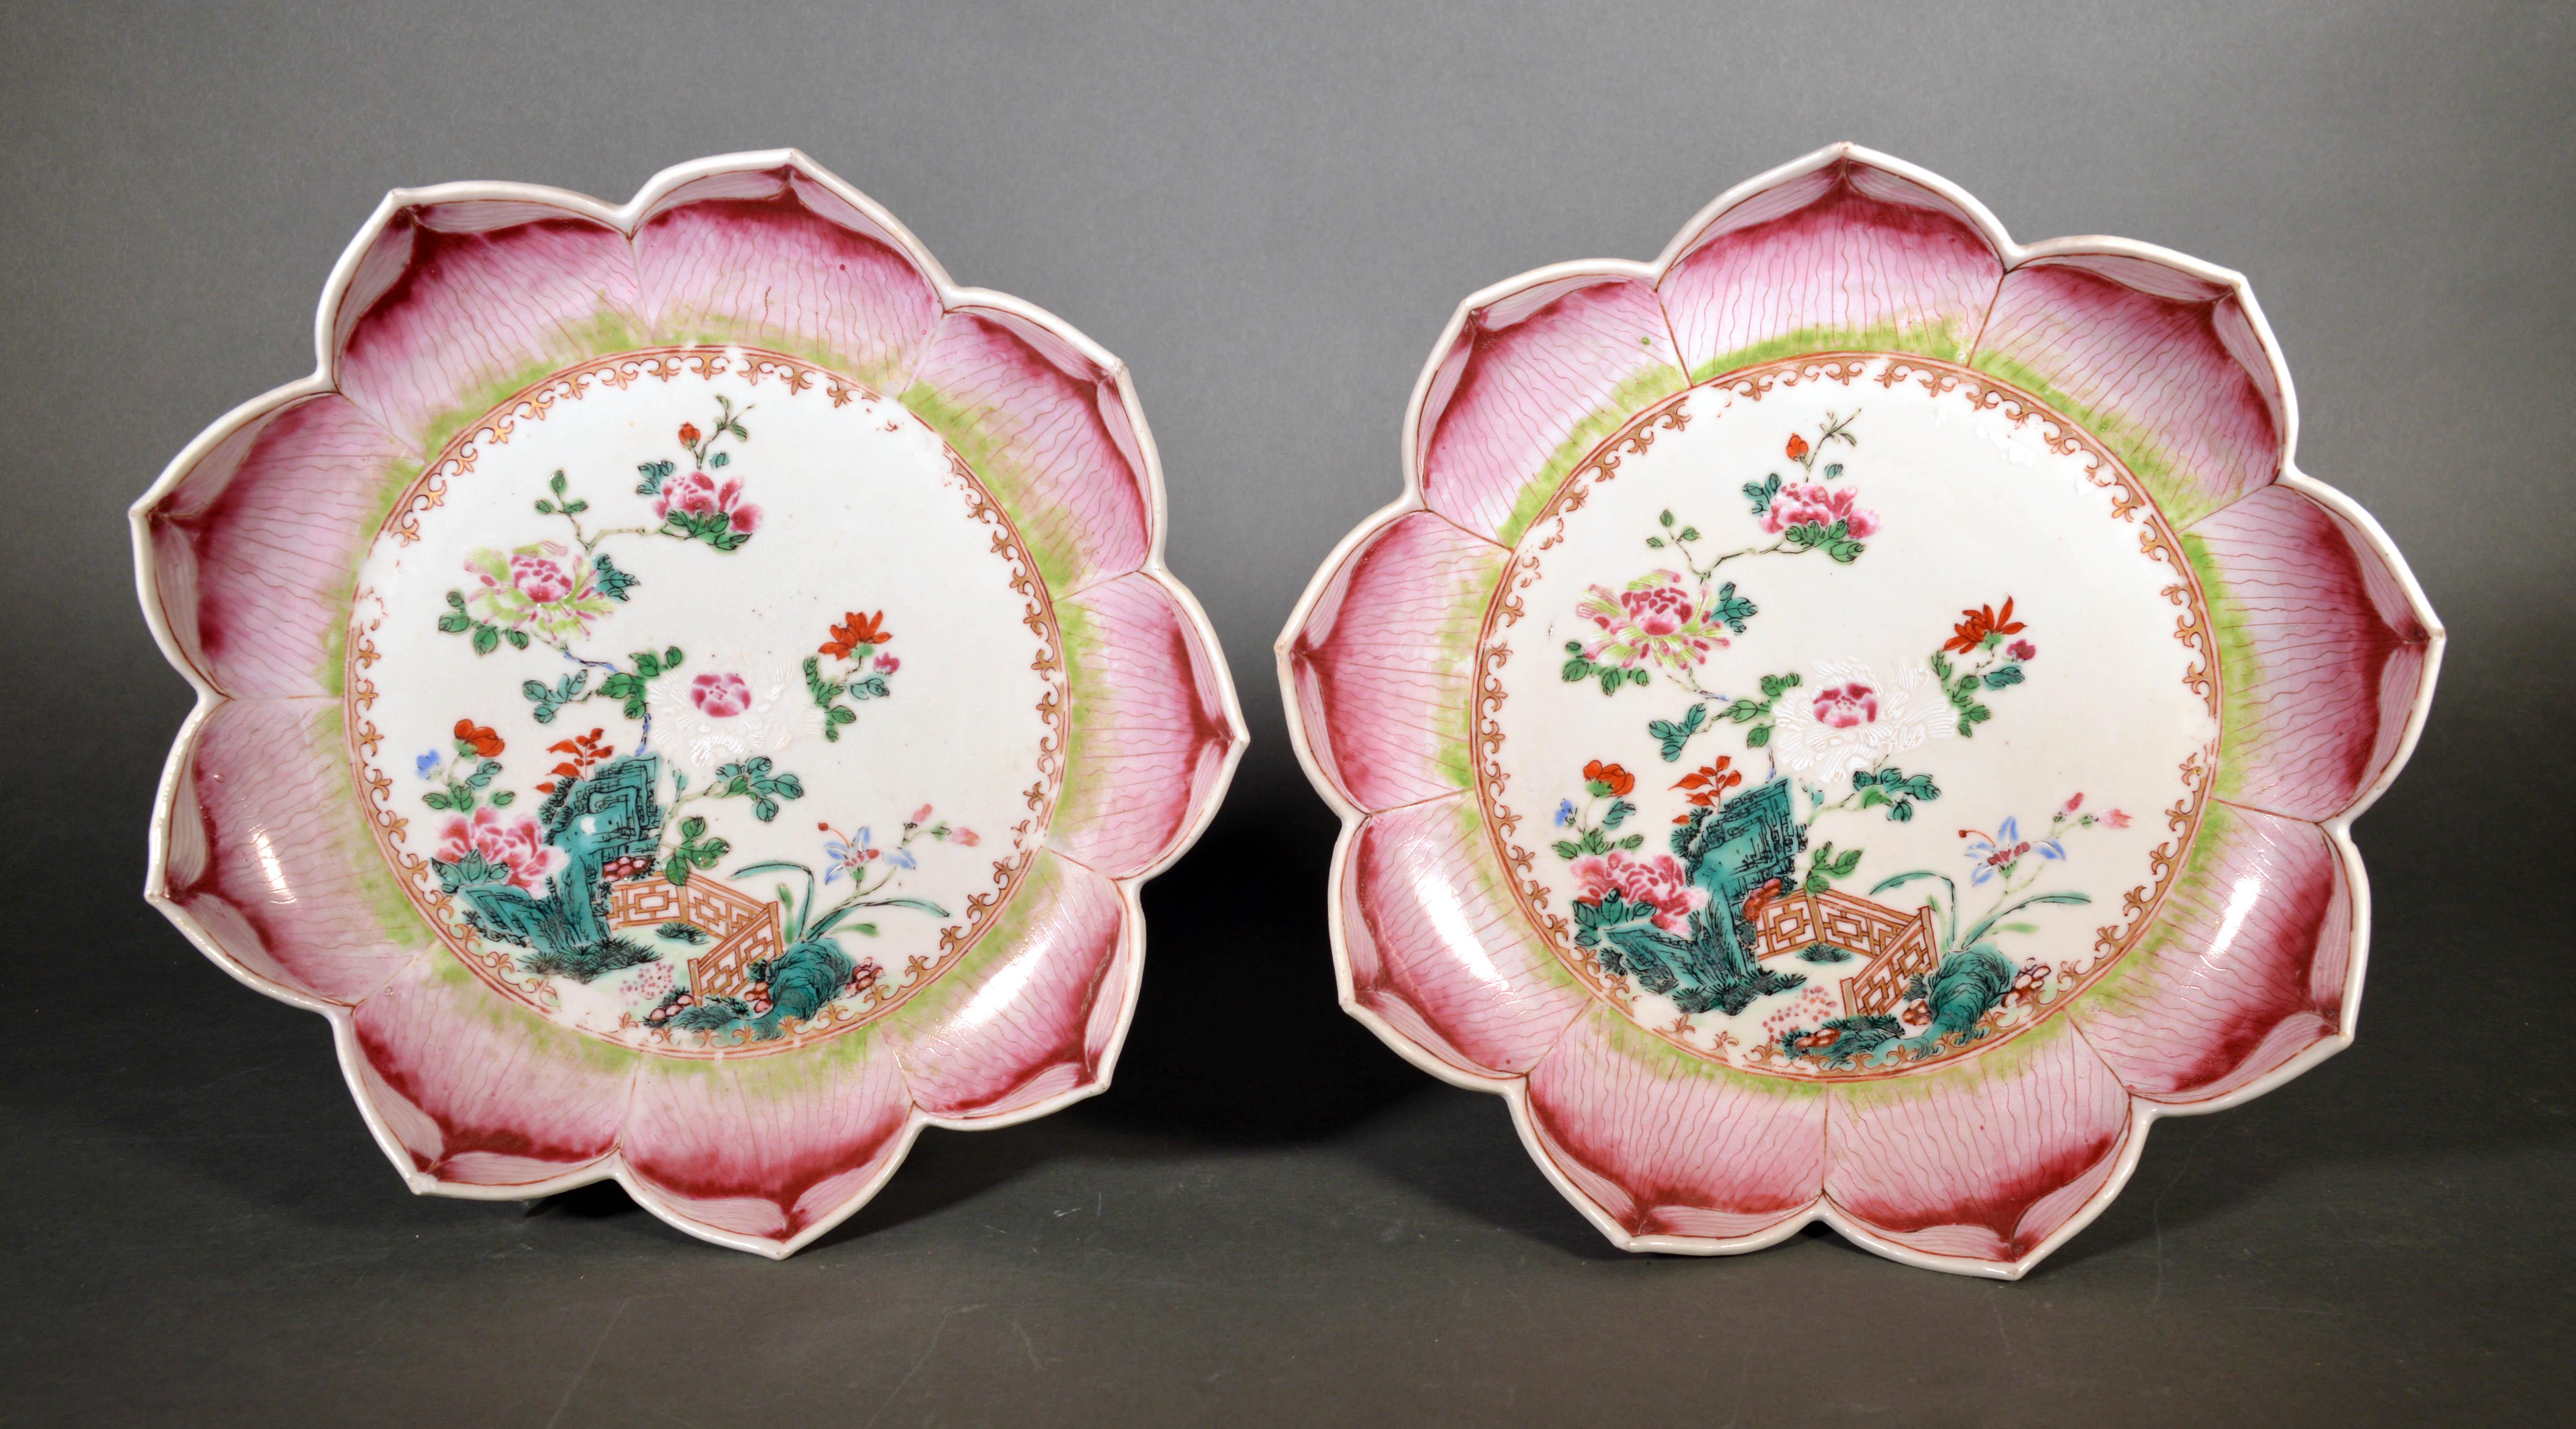 Chinese Export porcelain lotus leaf shaped pair of dishes,
circa 1765


The large Chinese Export “famille rose” porcelain saucer dishes are made in the form of a lotus leaf with the rim and border in the form of nine different lotus leaf petals